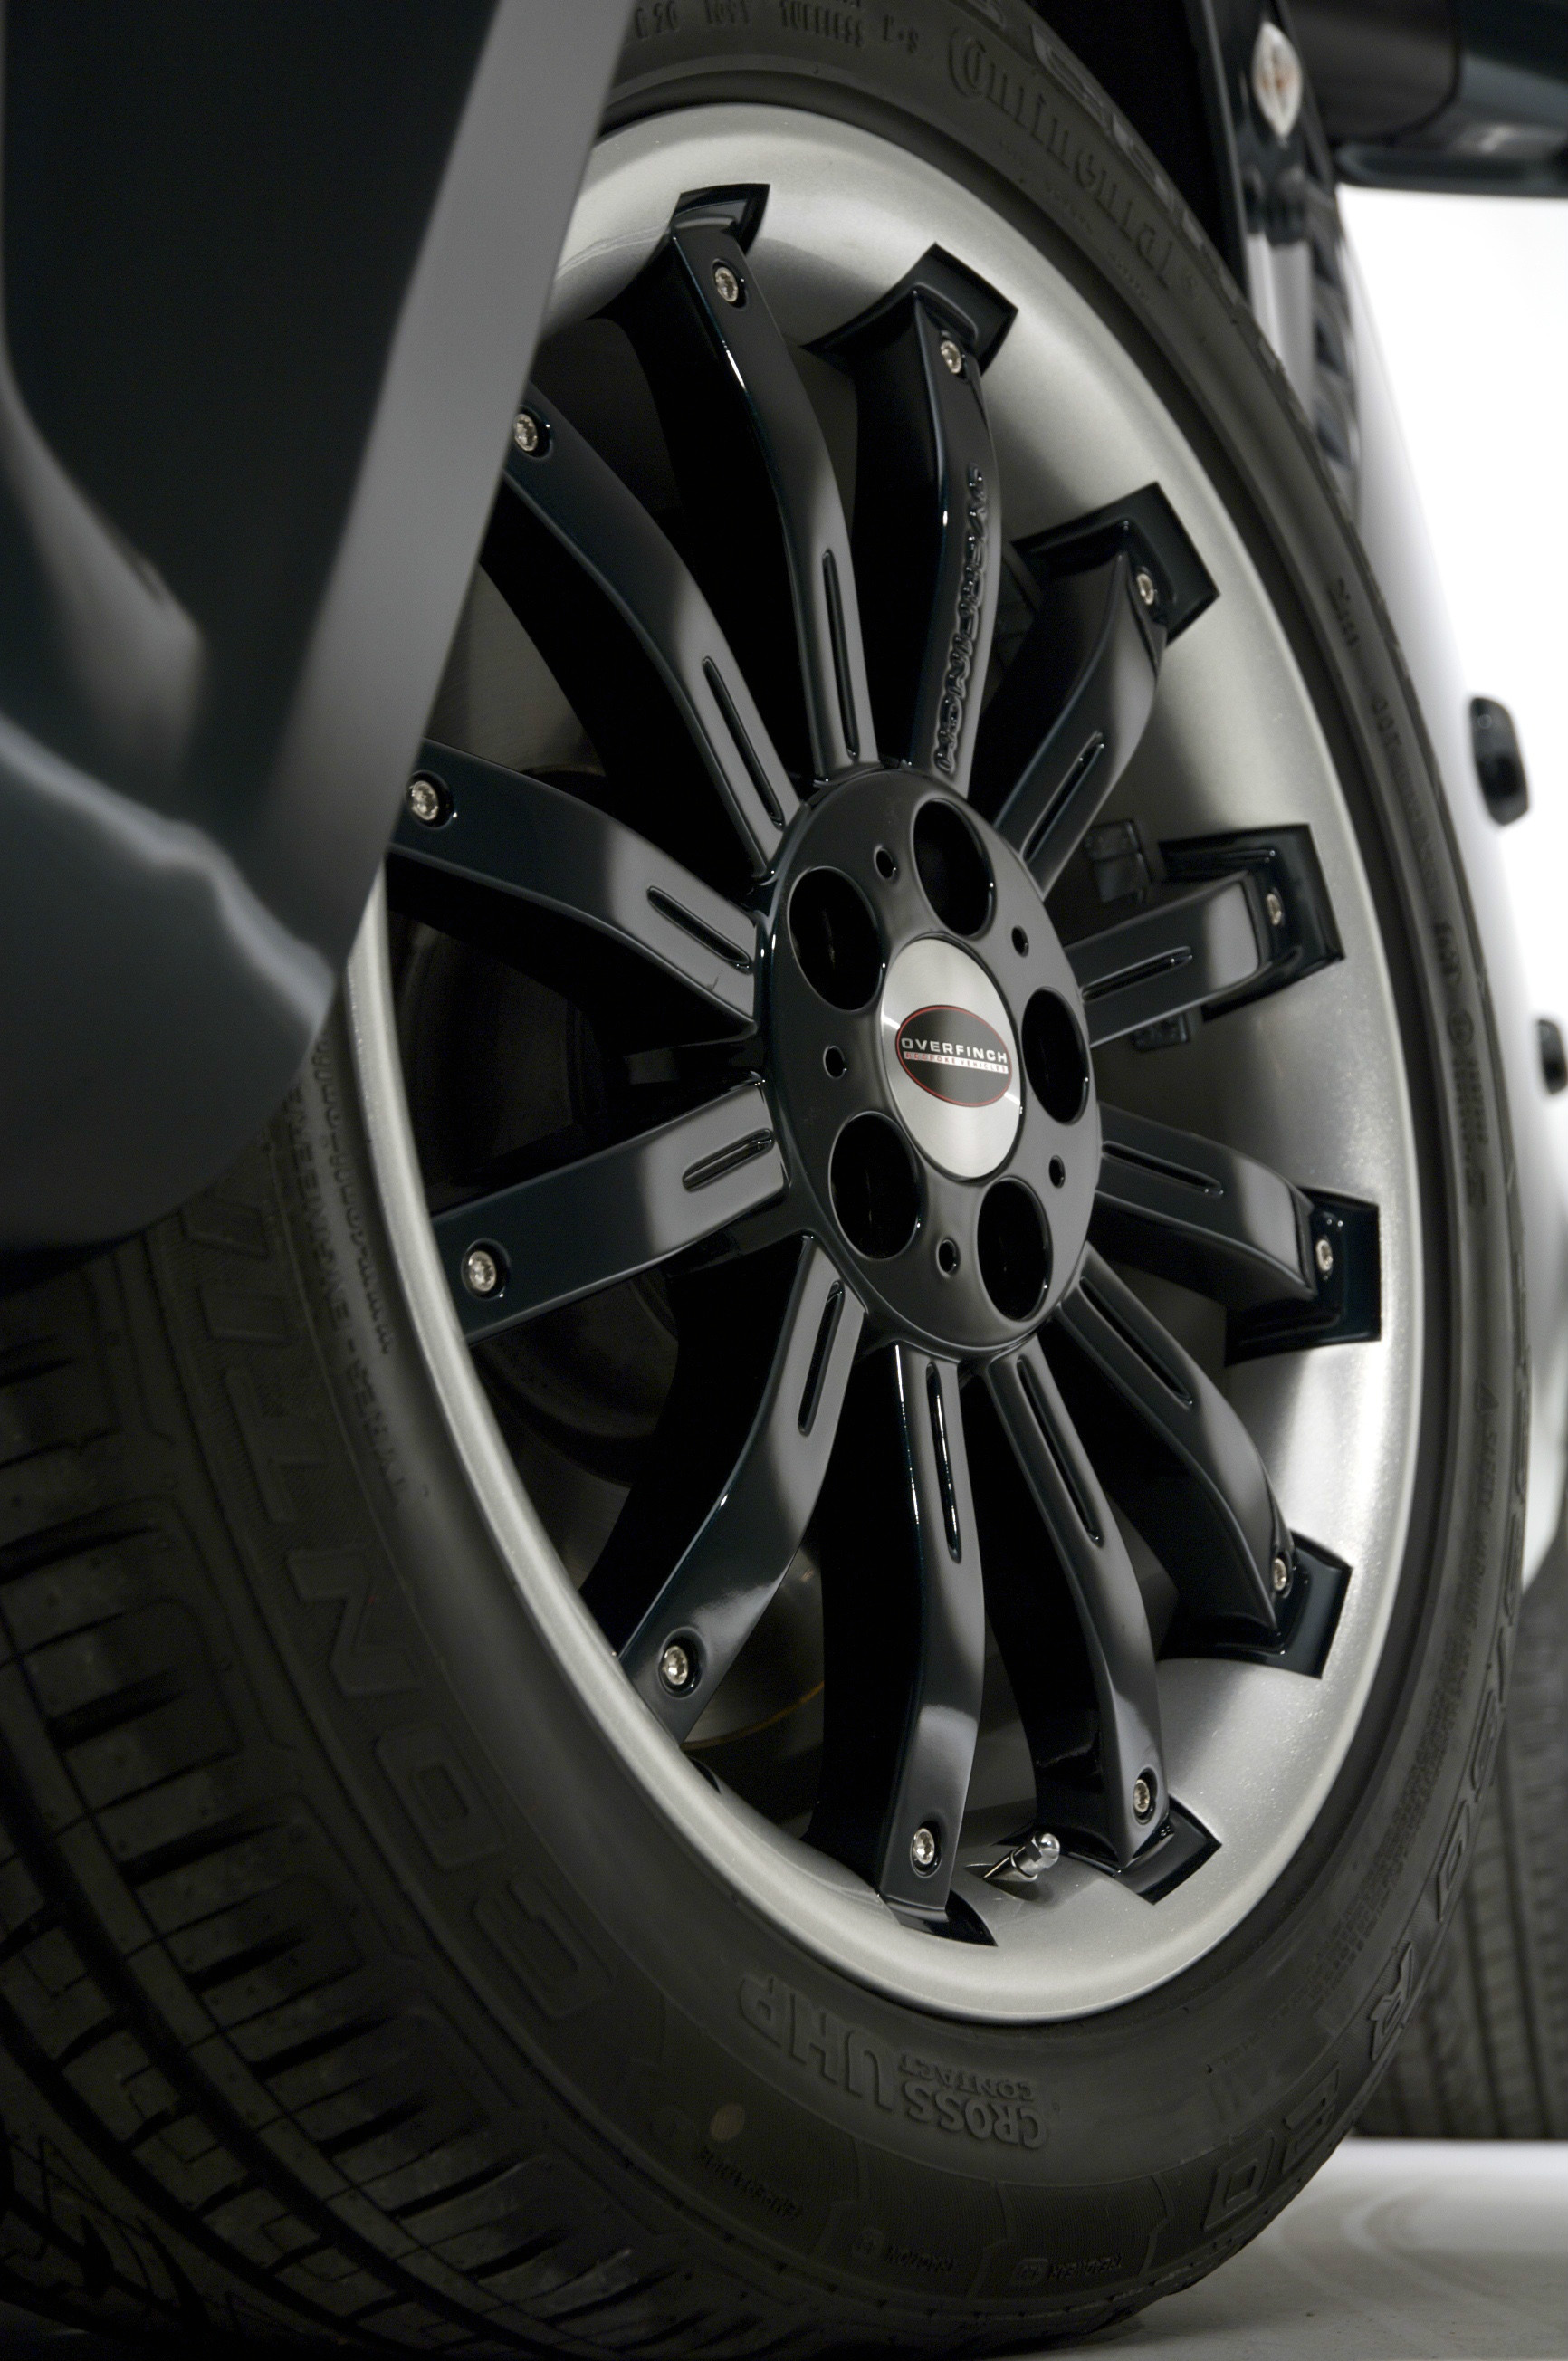 Some Overfinsh alloy wheels have nine coats of paint